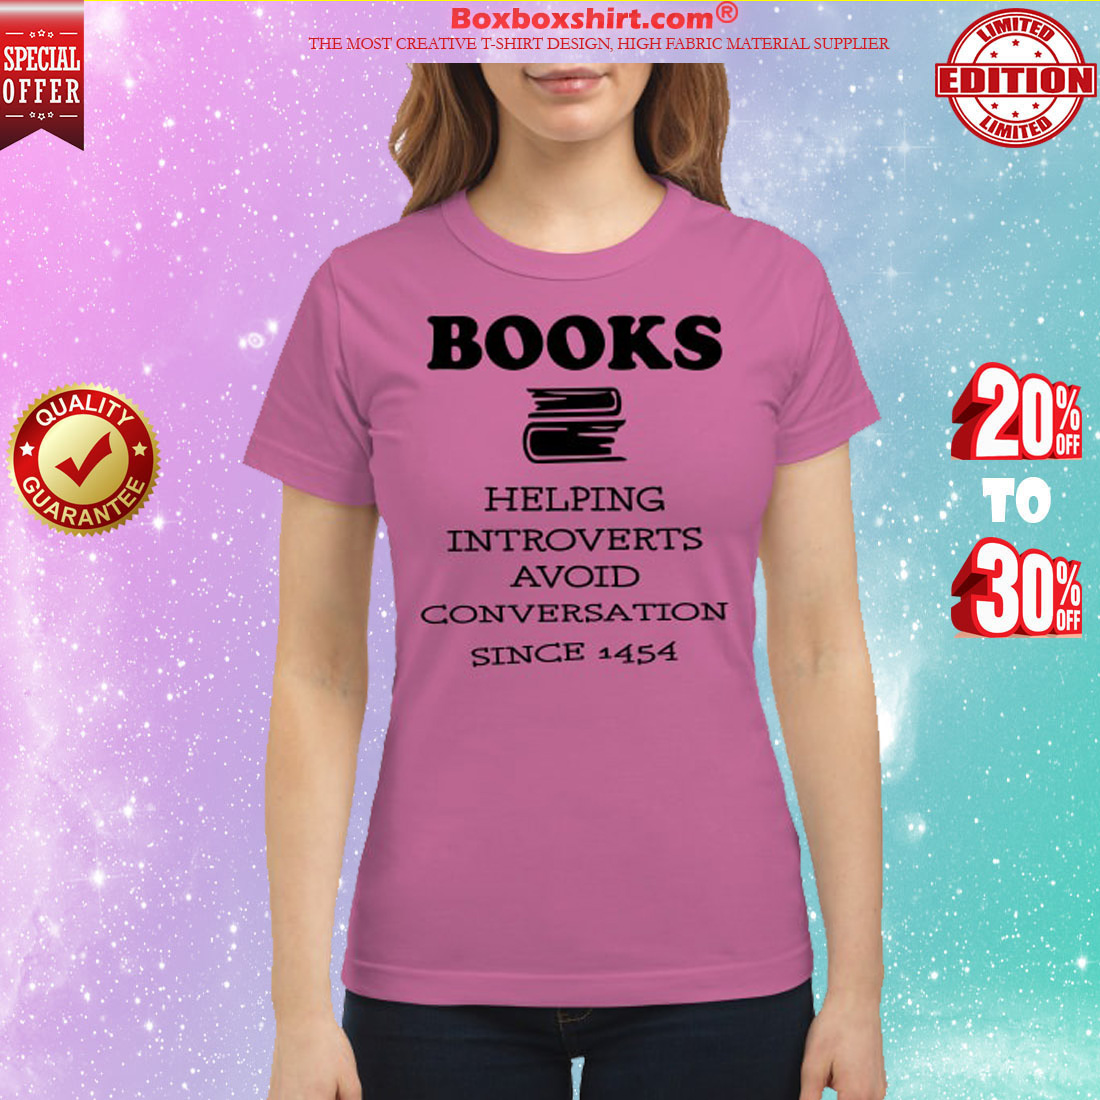 Books helping introverts avoid conservation since 1454 classic shirt